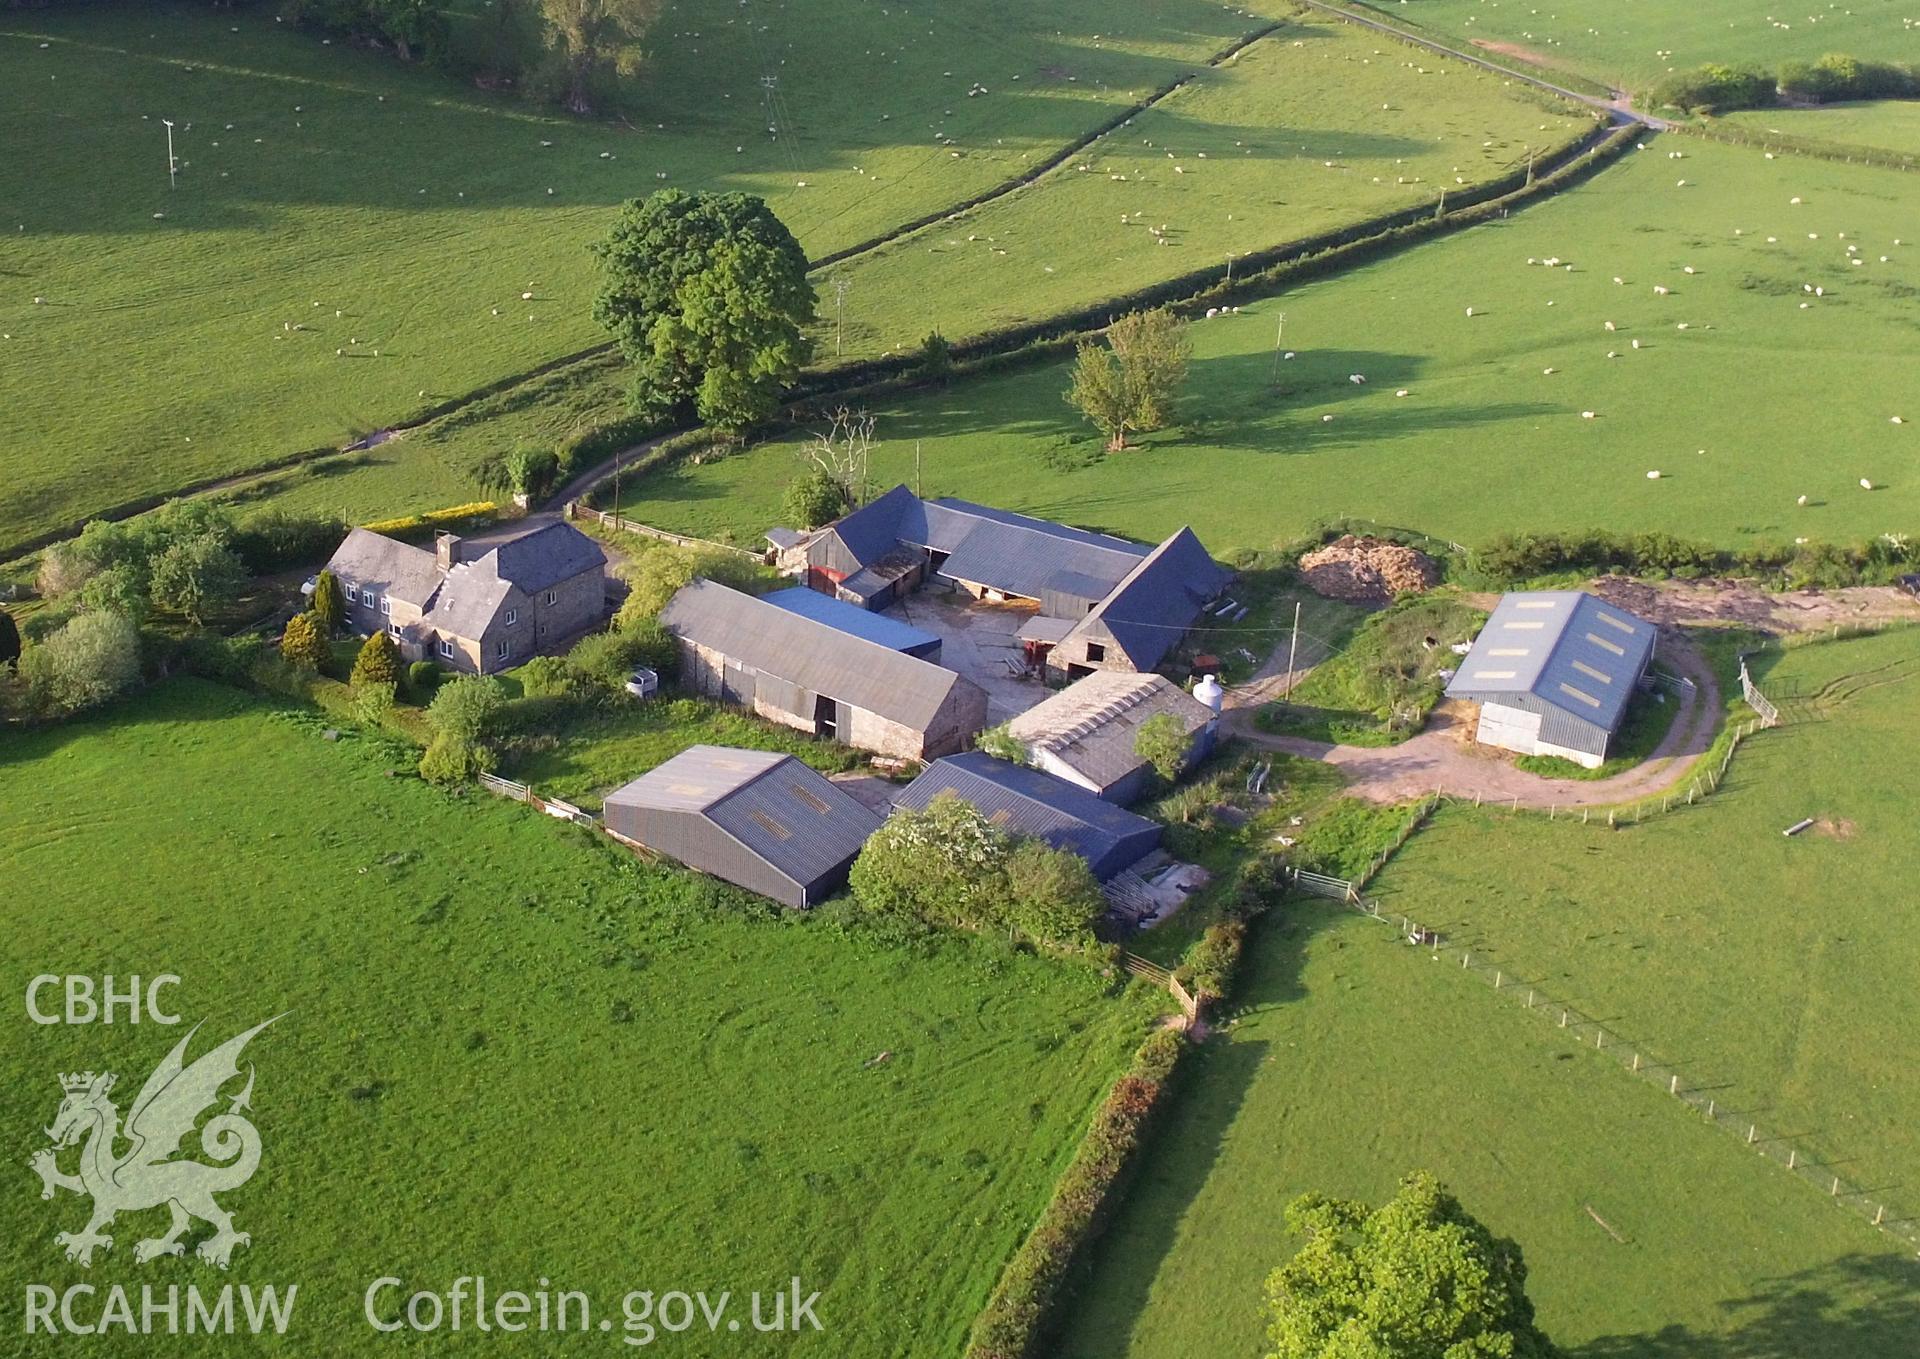 Colour aerial photo showing Gwenffrwd House, taken by Paul R. Davis, 29th May 2016.